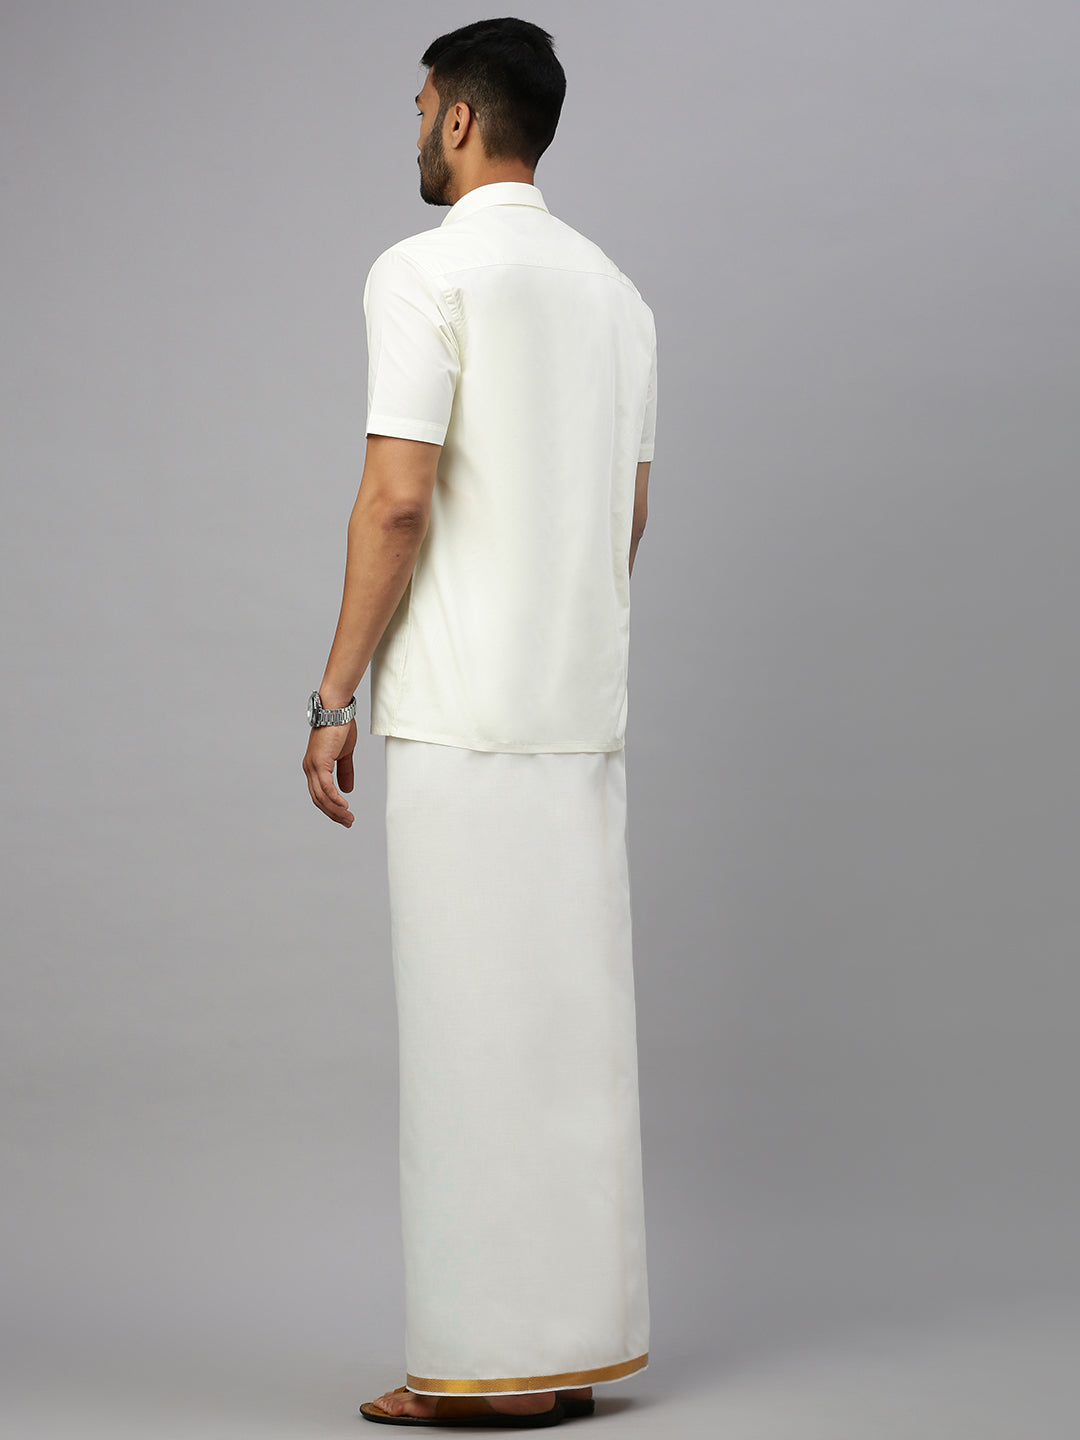 Mens Double Dhoti Cream with Gold Jari Border 3/4" Gold Leaf